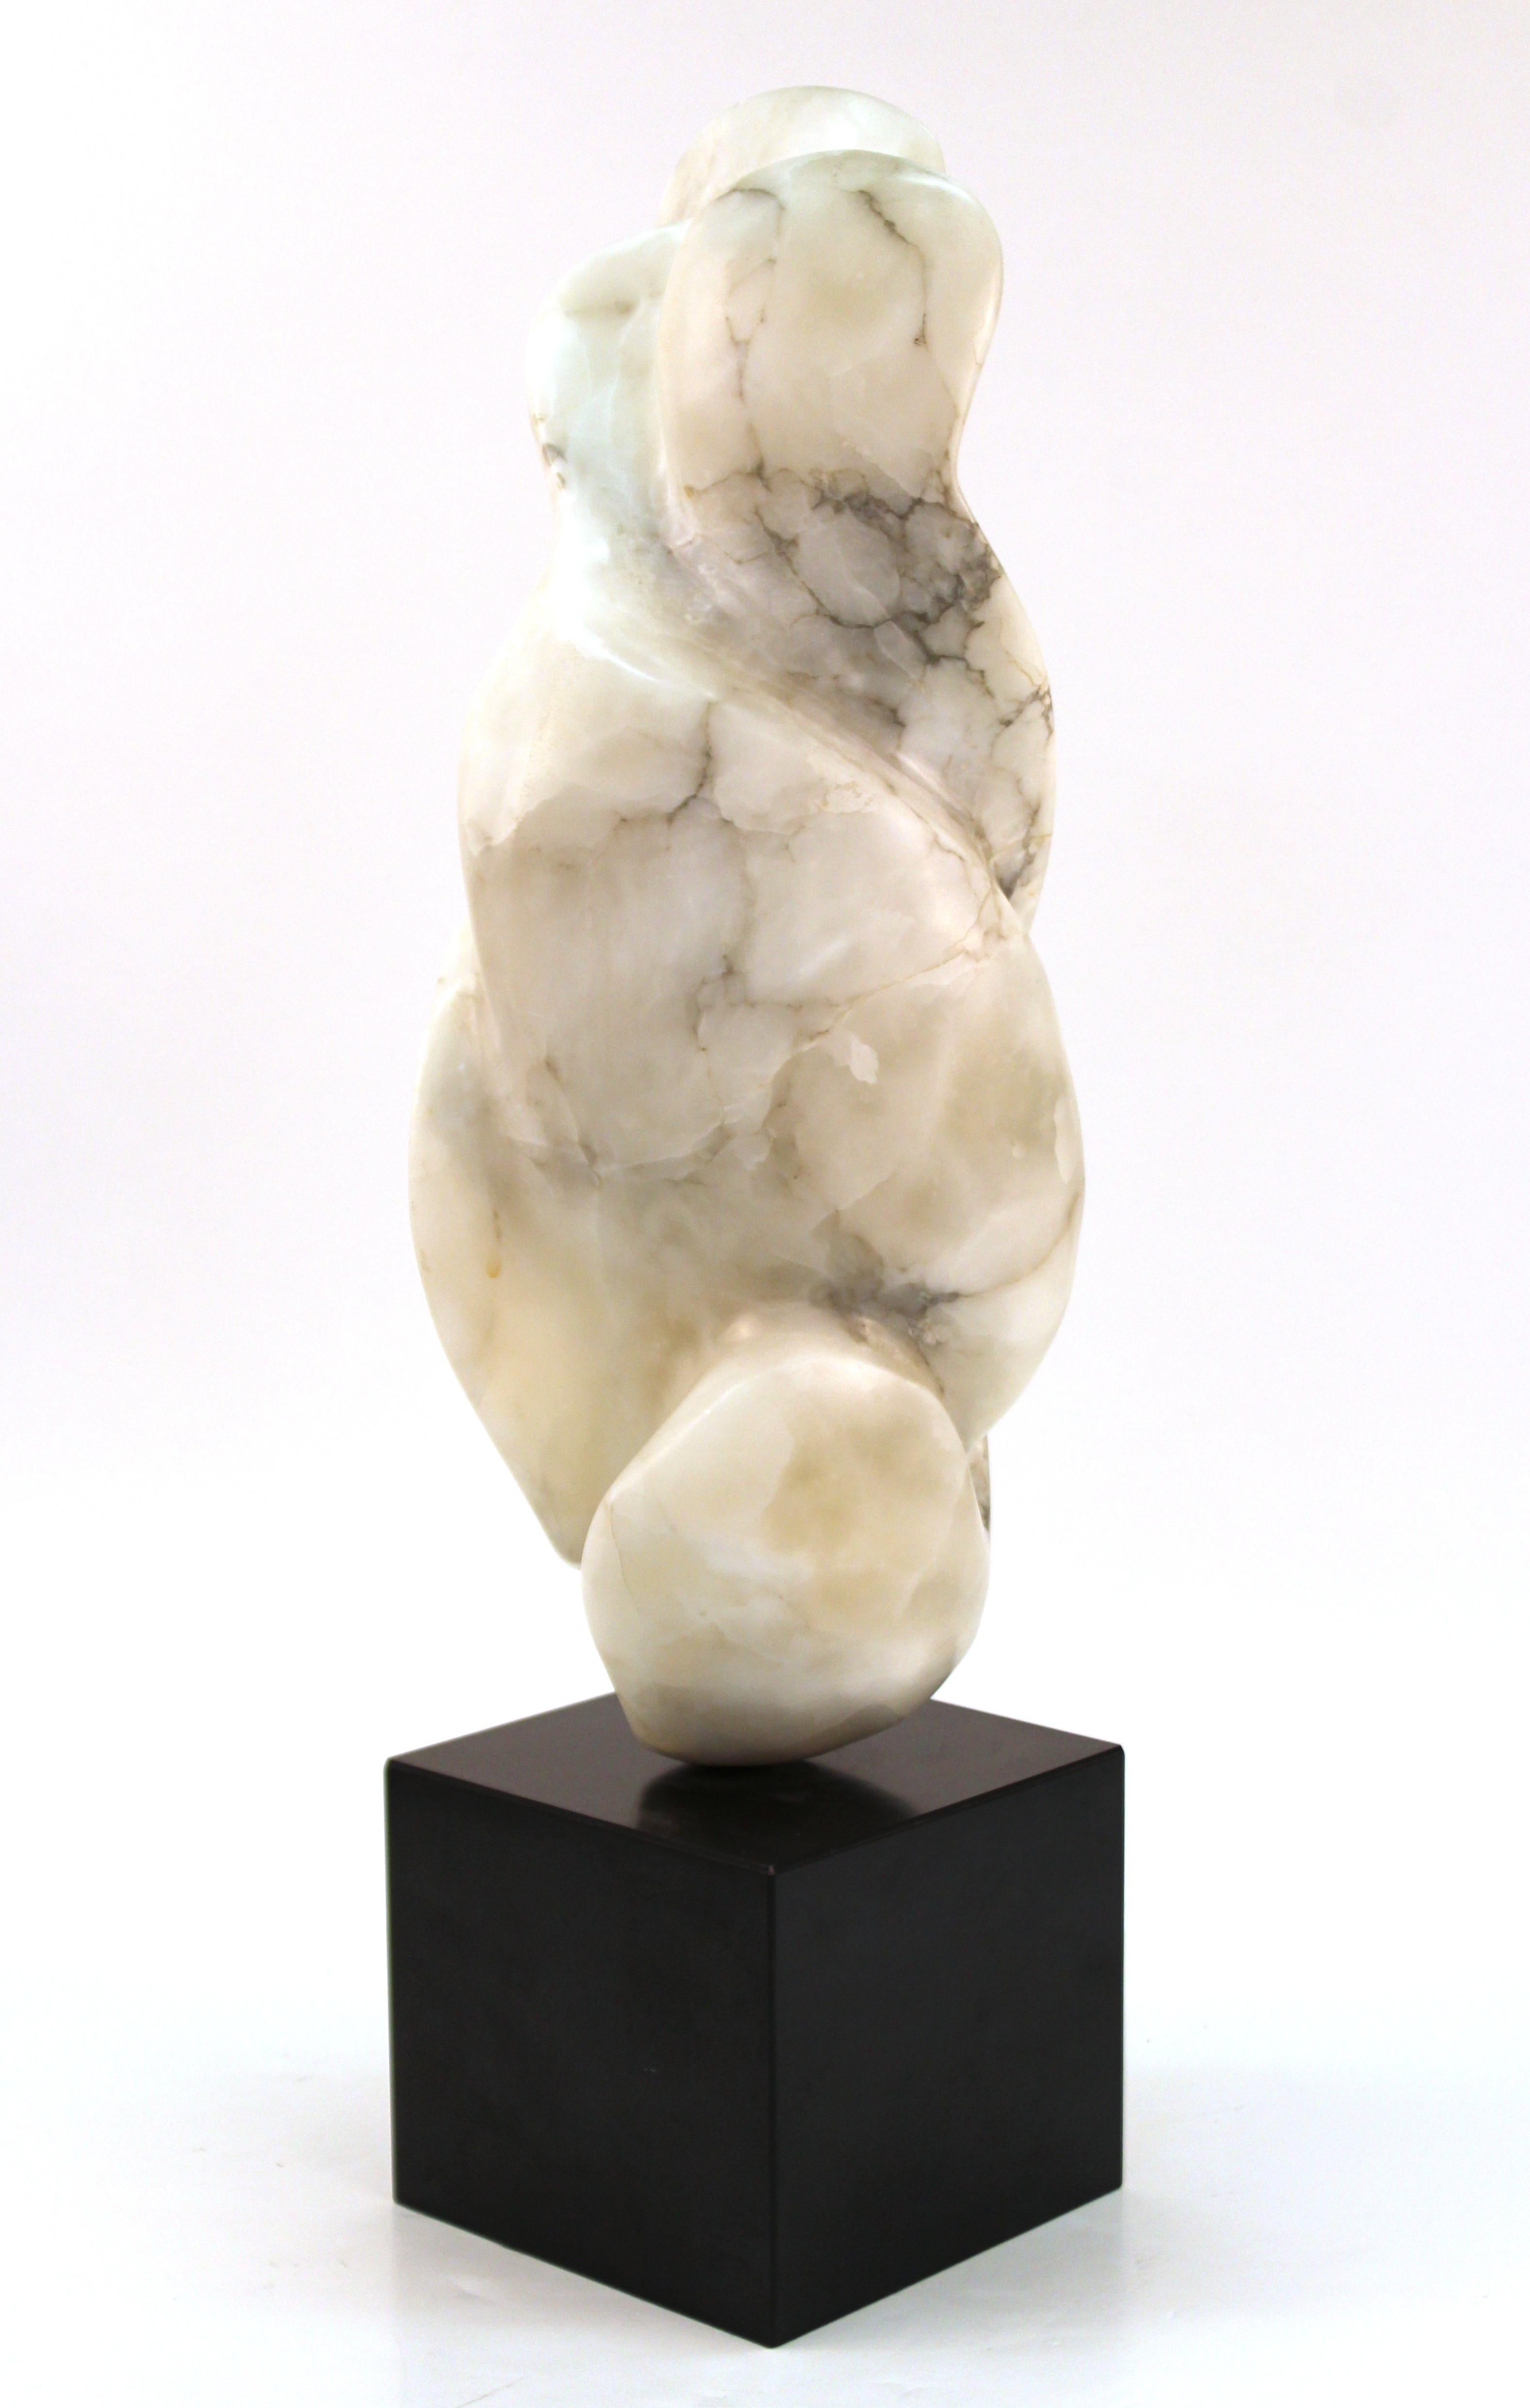 Mid-Century Modern abstract biomorphic marble sculpture, signed Levner. The piece is carved in off-white veined marble and is mounted on a square black base. Signed by the artist 'Levner' and dated 1974 on the lower edge of the sculpture. In great